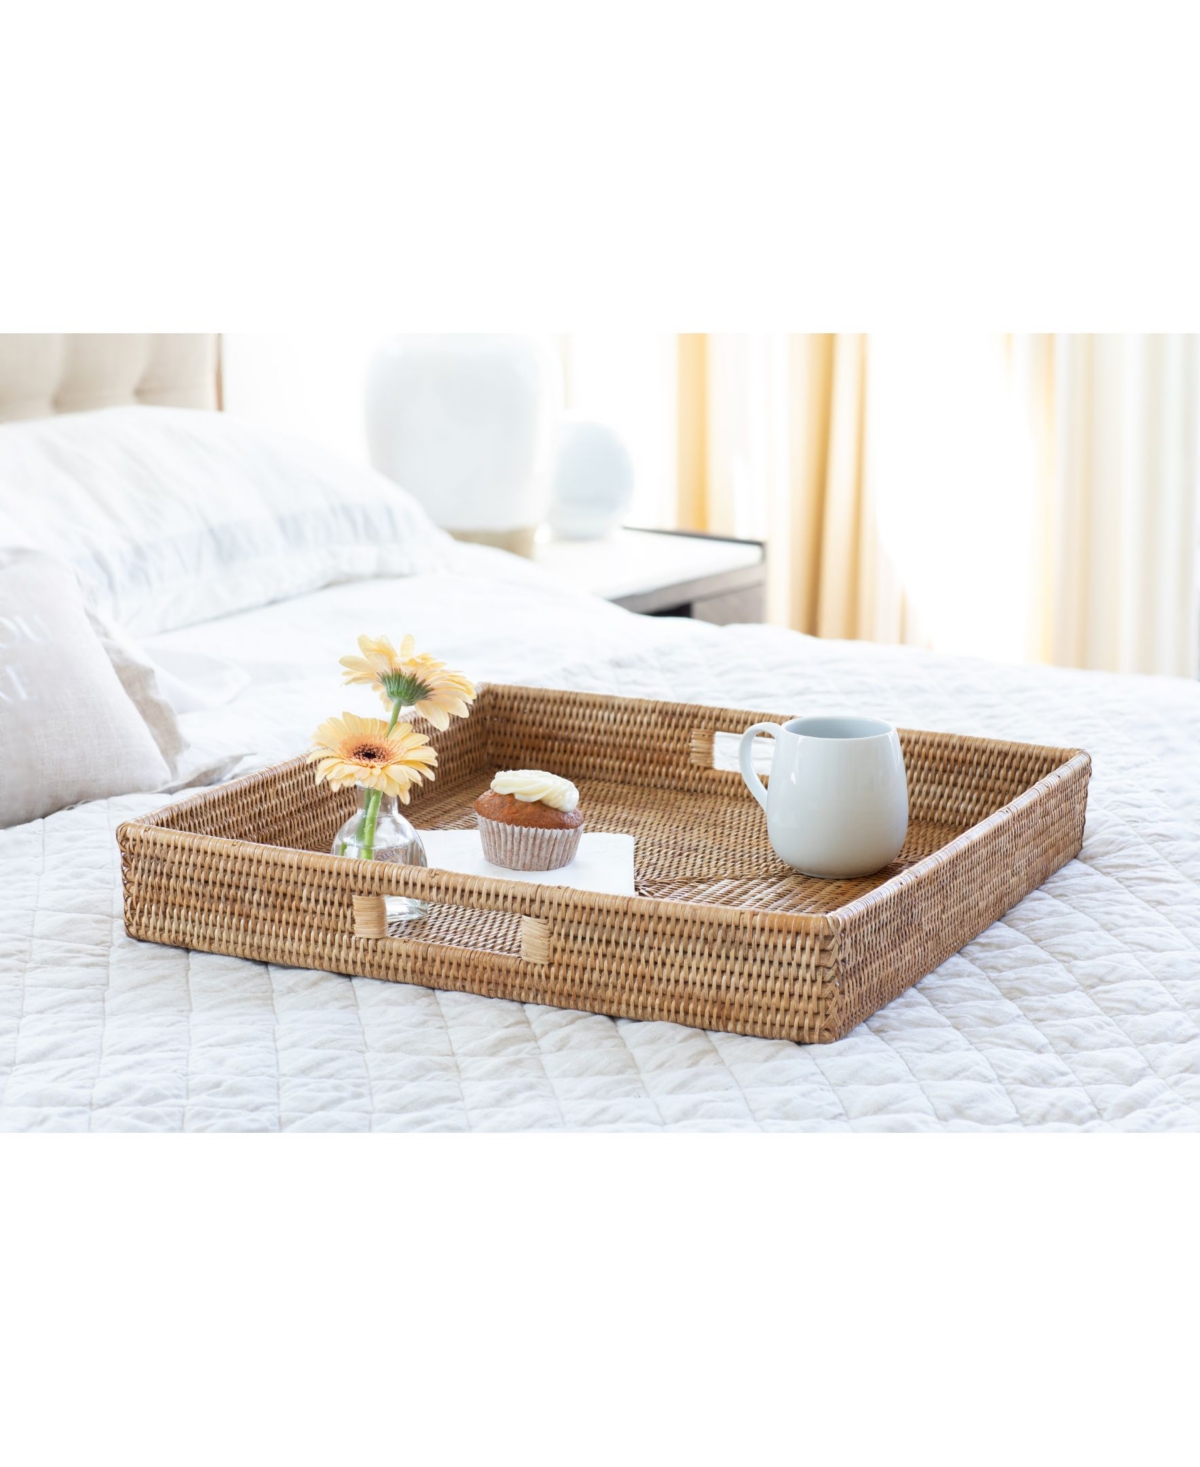 Shop Artifacts Trading Company Artifacts Rattan Square Ottoman Tray In Honey Brown